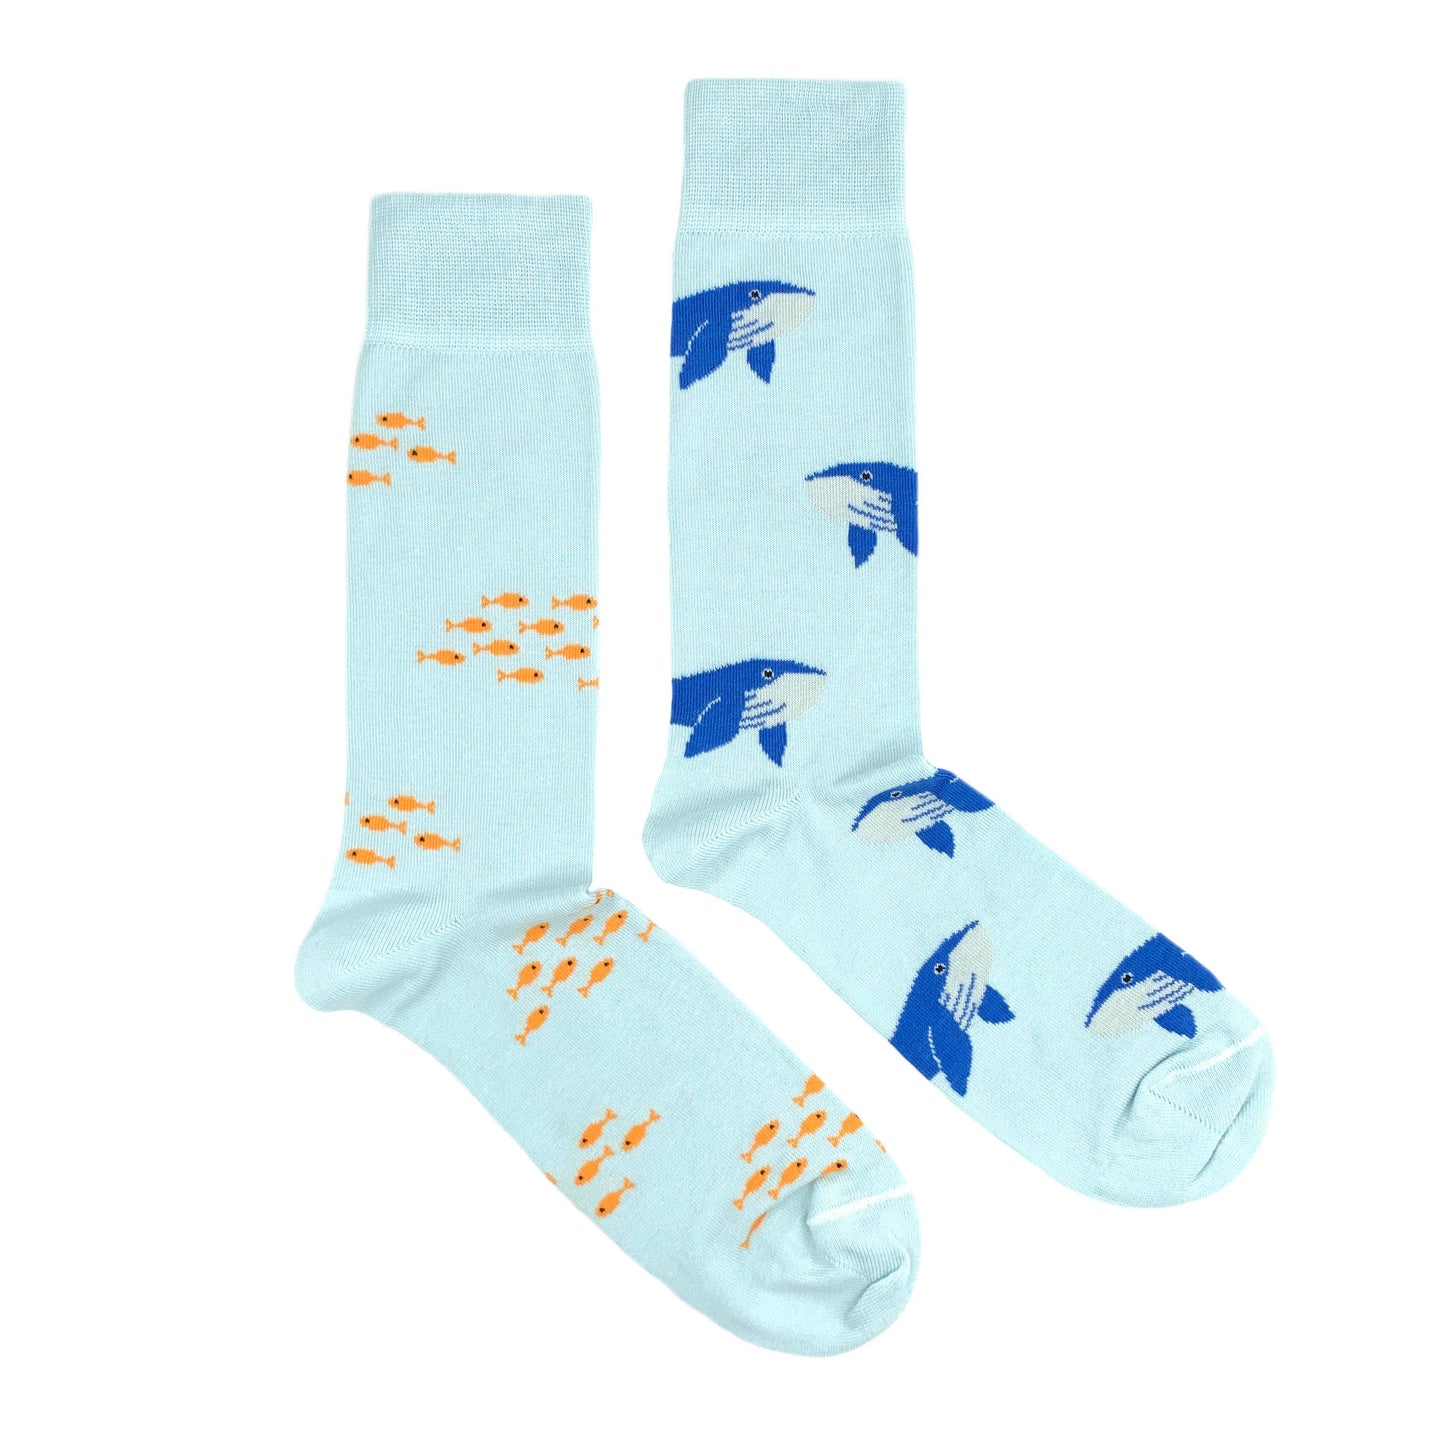 Whale and Fishes Mismatched Men’s Socks